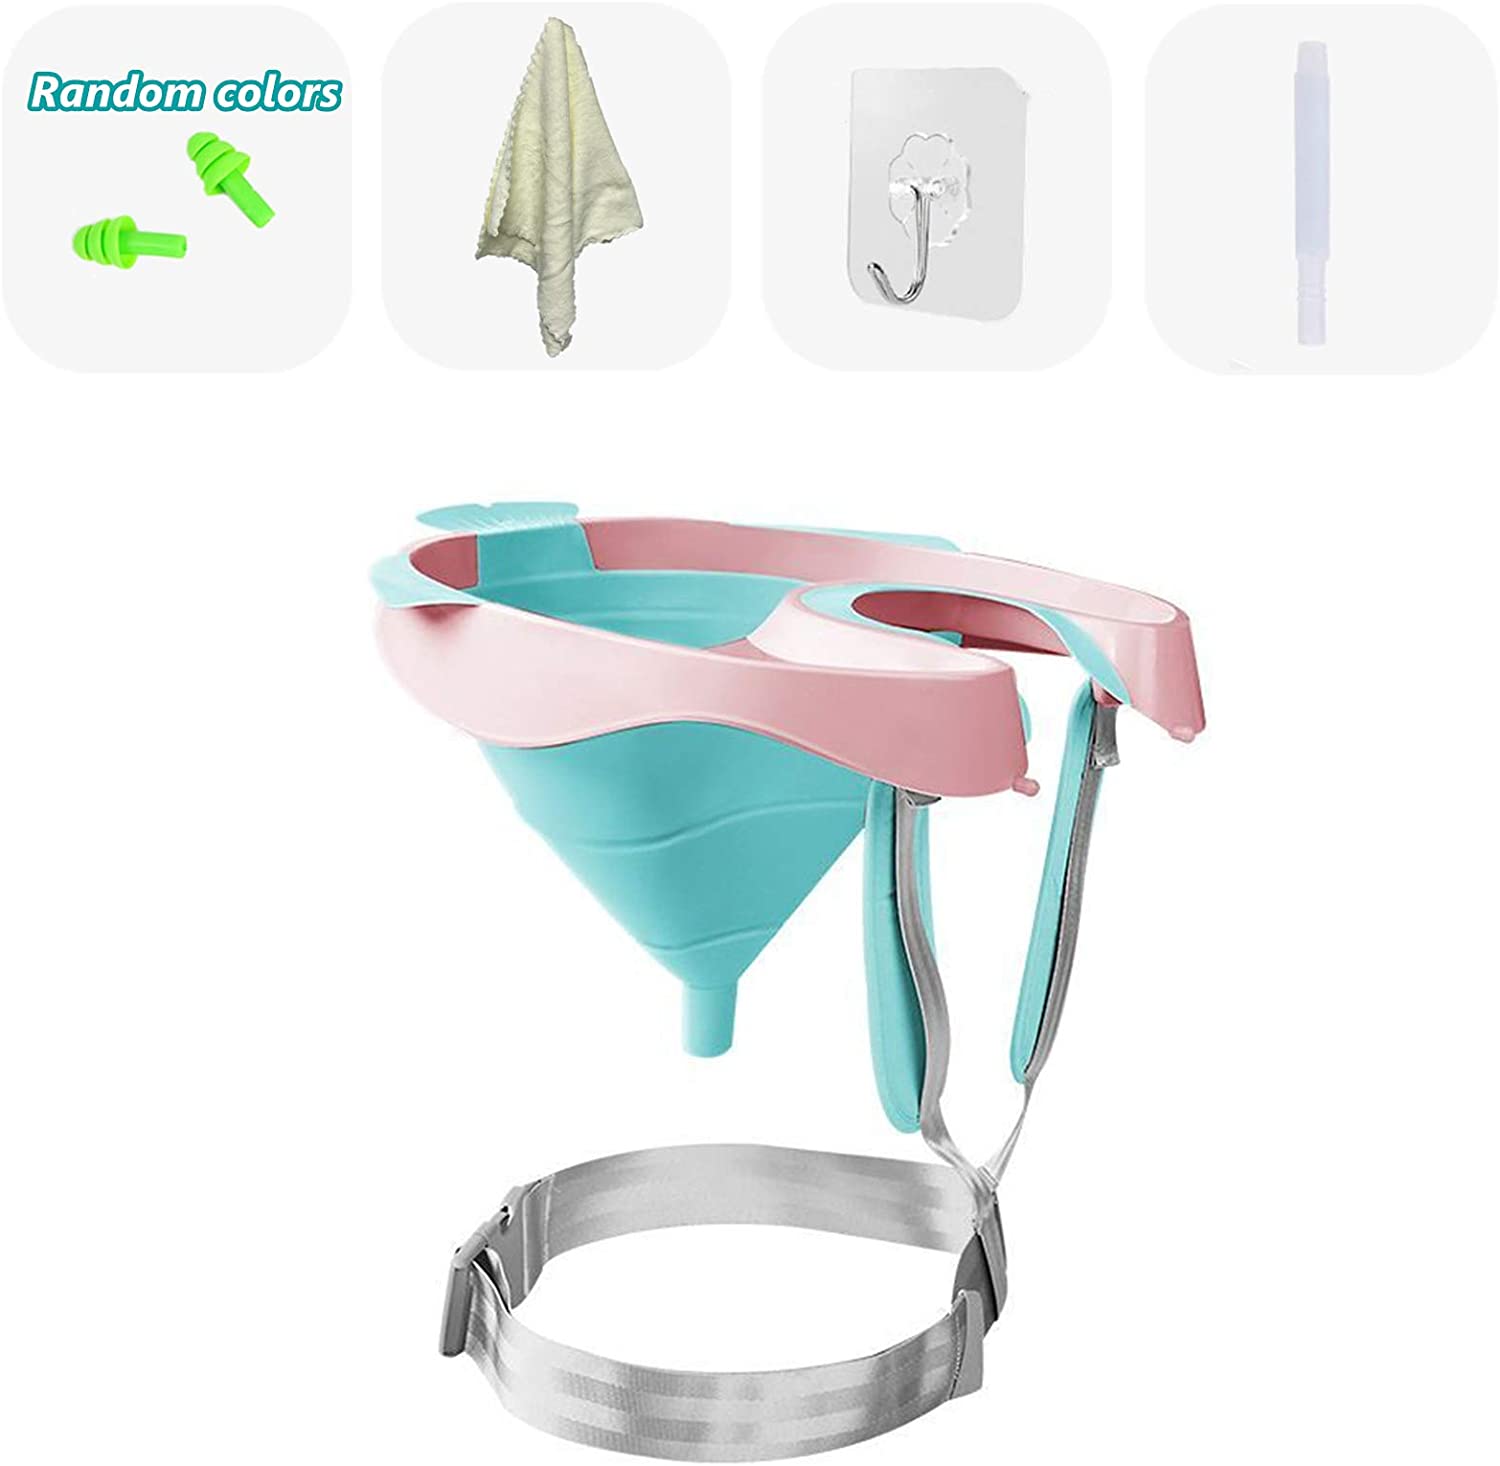 Portable Hair Shampoo Basin, Hair Washing Sink with Strap and Removable Drain Tube for Pregnant, Elderly